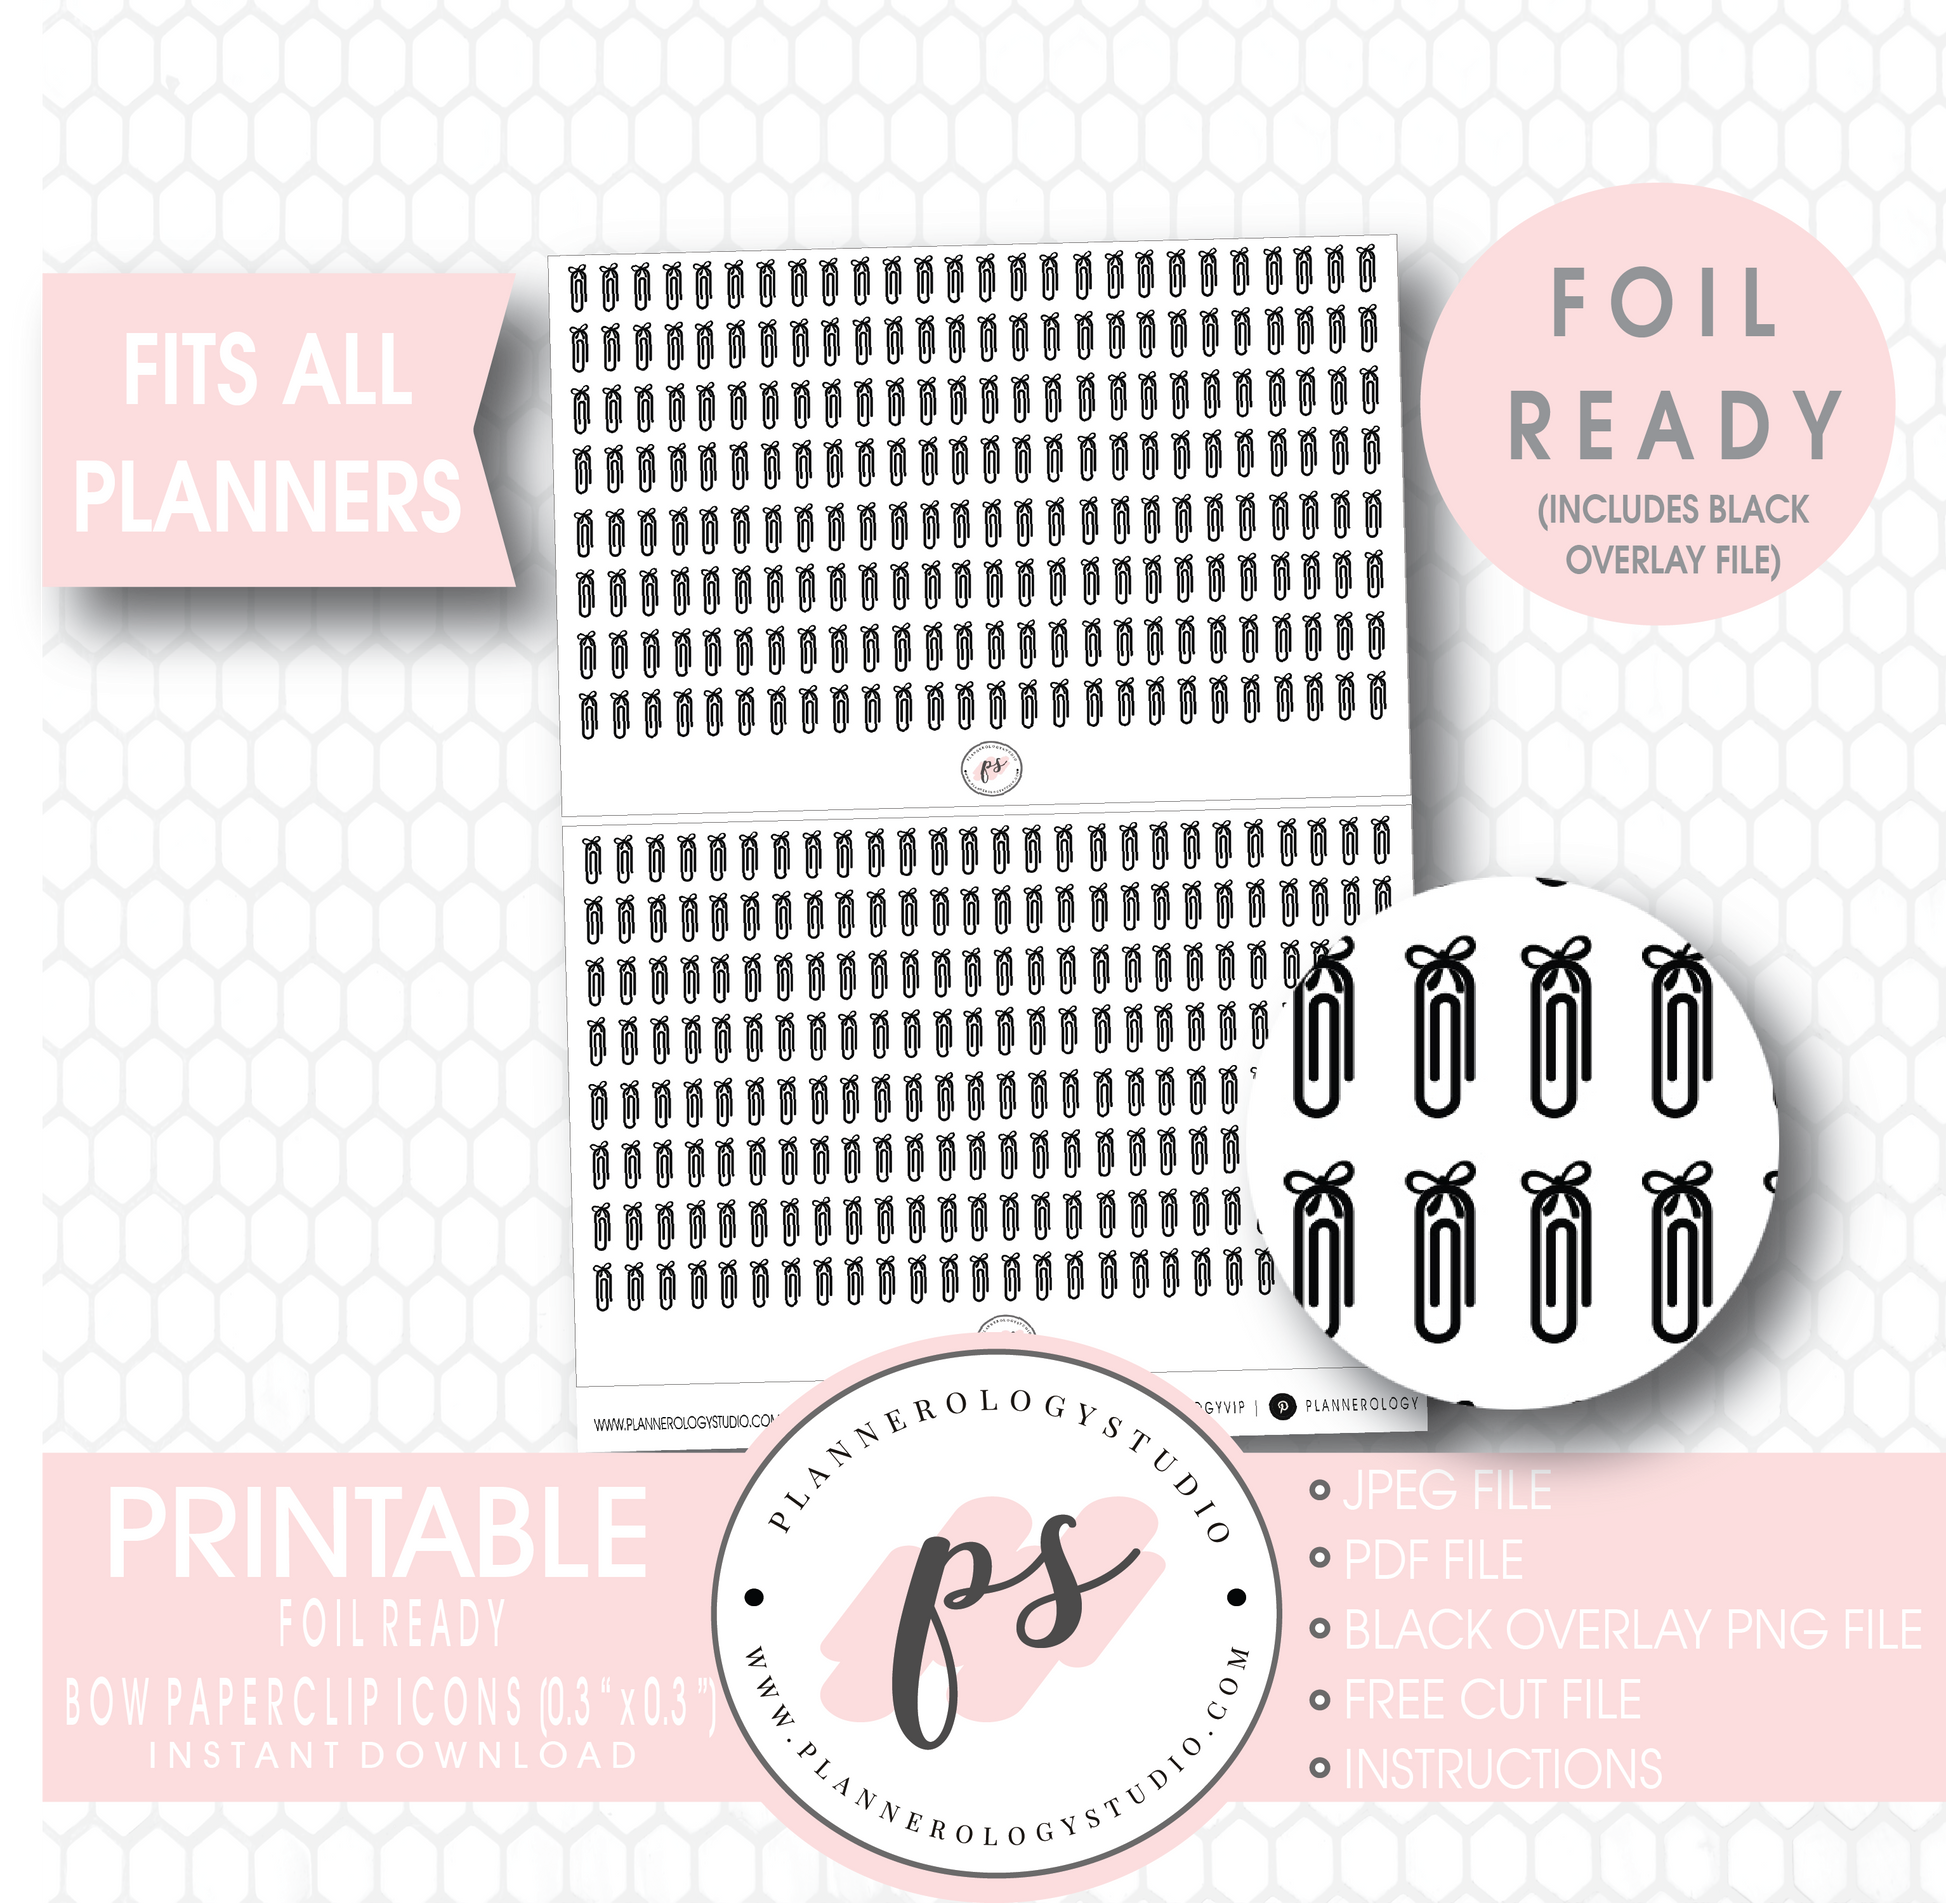 Bow Paperclip Icon Digital Printable Planner Stickers (Foil Ready) - Plannerologystudio